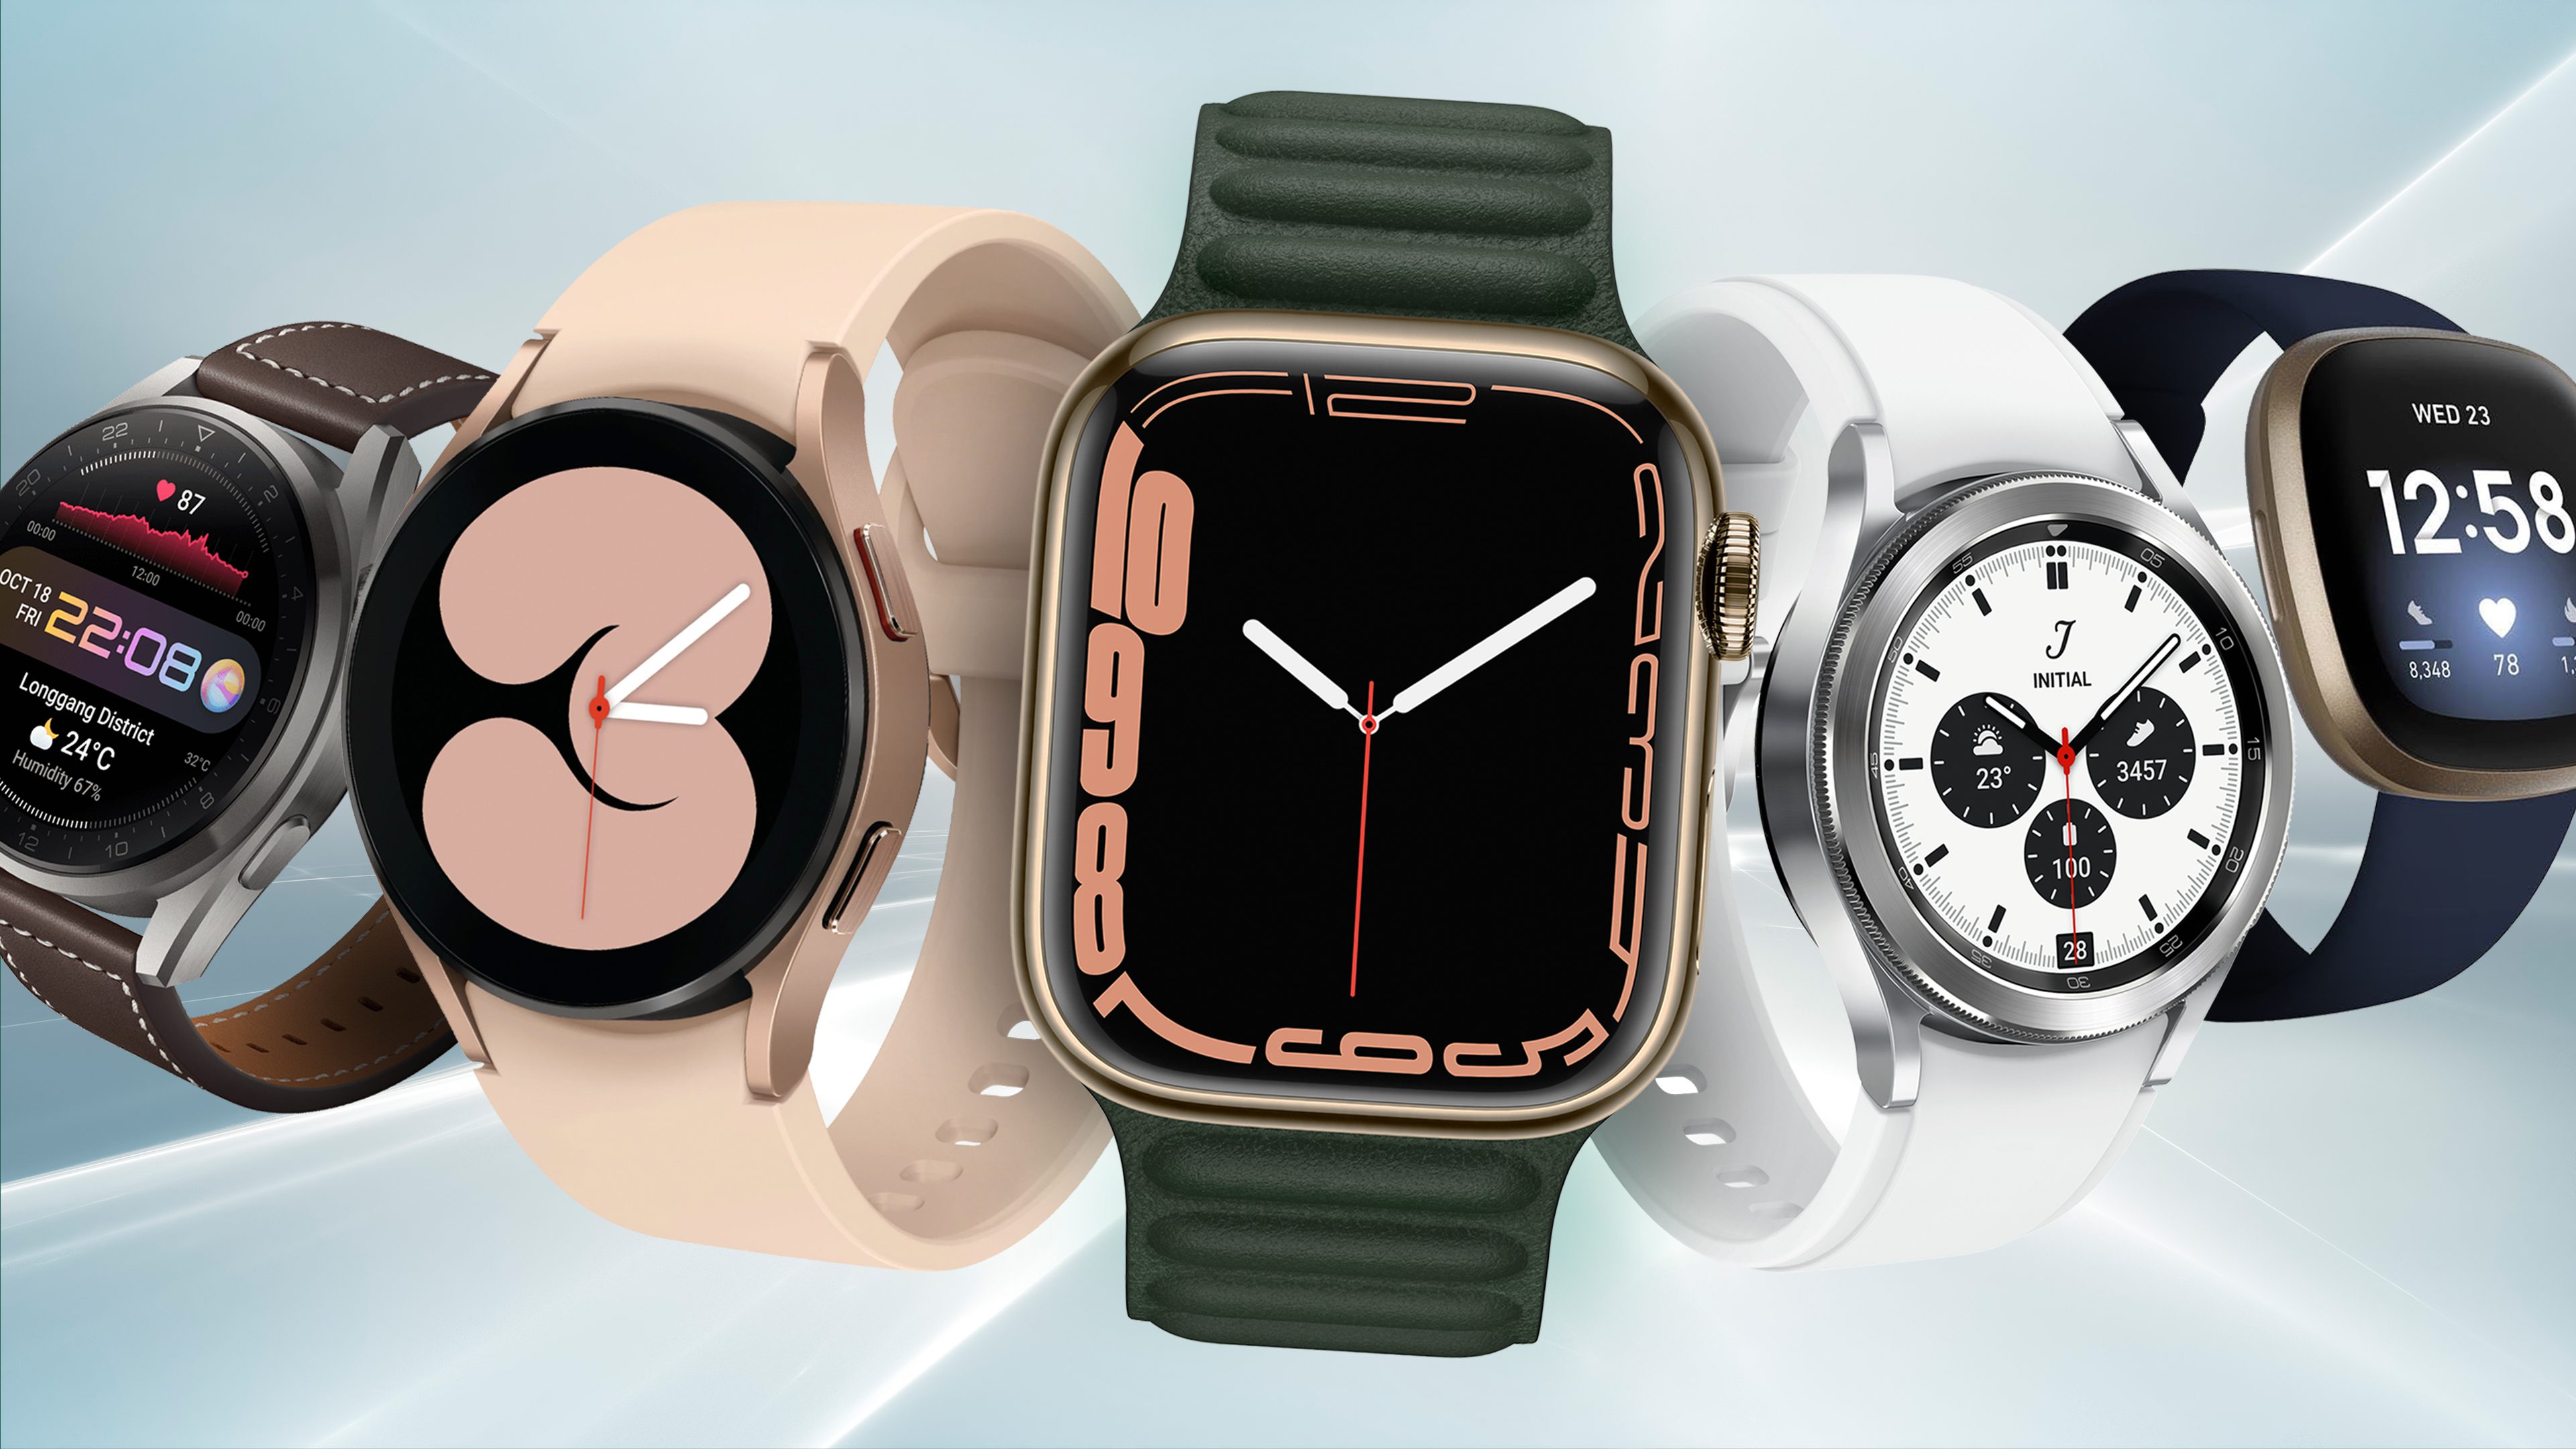 vreugde Hoelahoep wang The best Apple and Android smartwatches of 2022 | NextPit